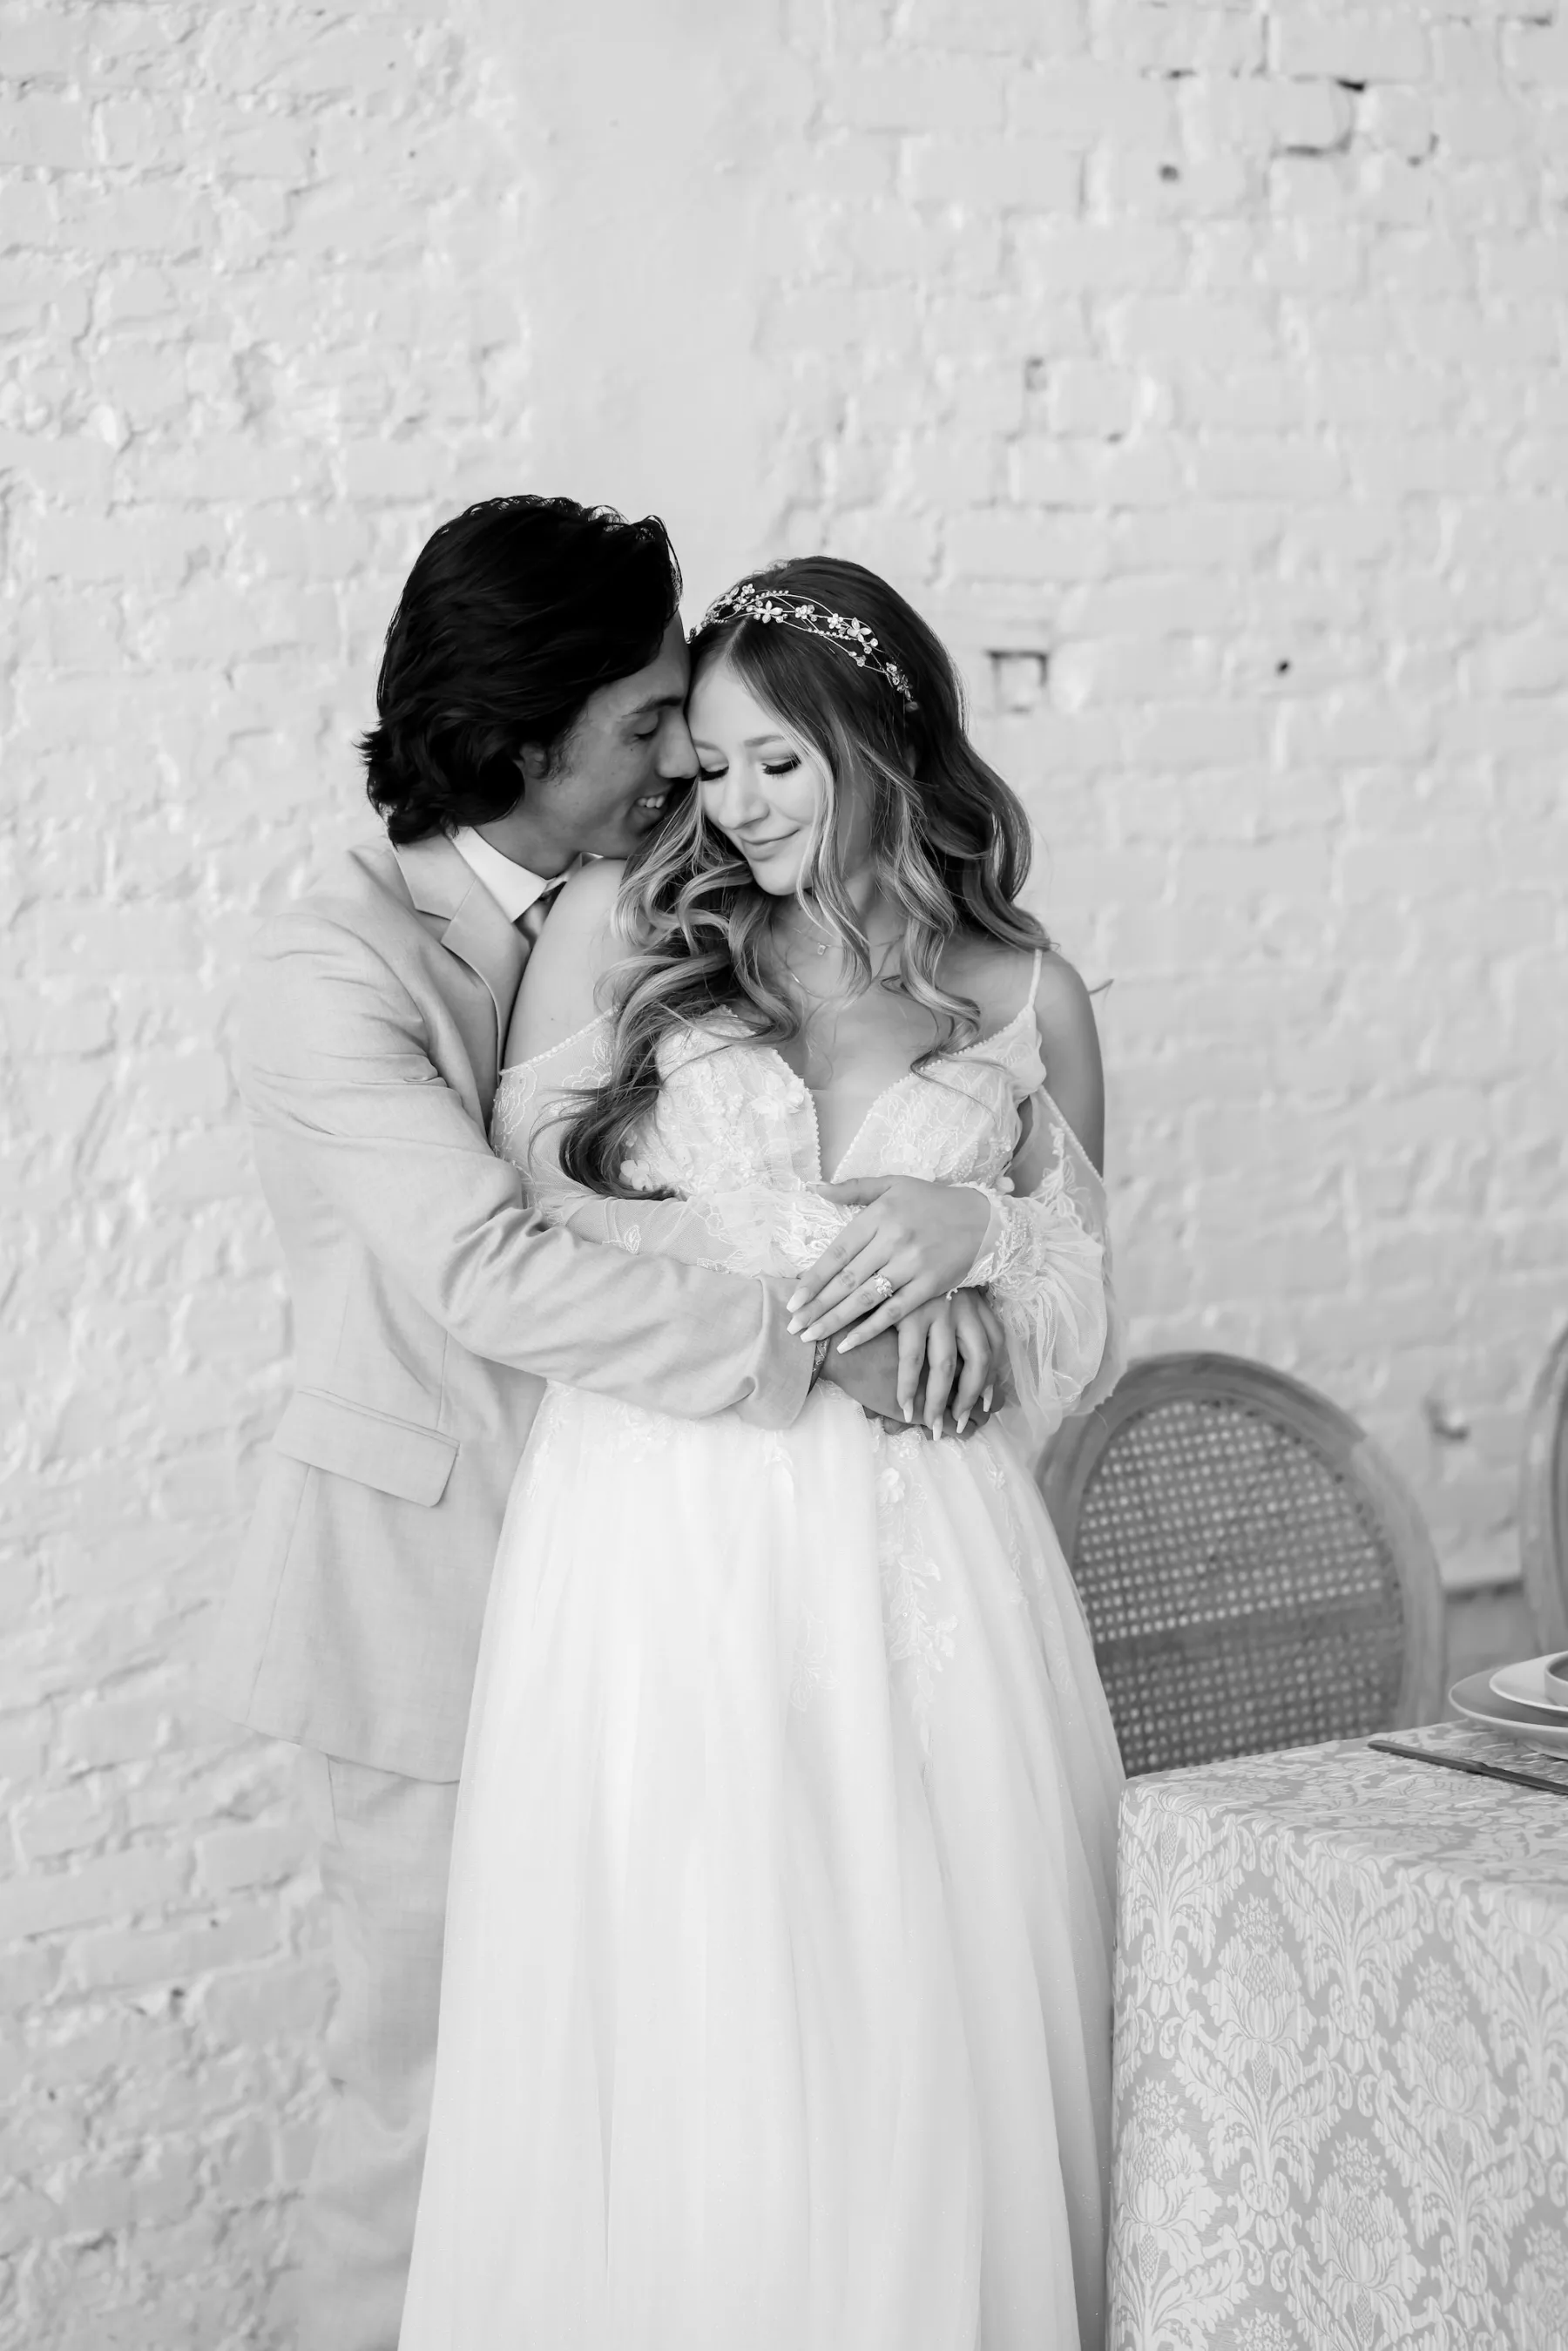 Bride and Groom Black and White Wedding Portrait | Tampa Bay Photographer Lifelong Photography Studio | Dress Truly Forever Bridal Tampa | Hair and Makeup Artist Adore Bridal Services